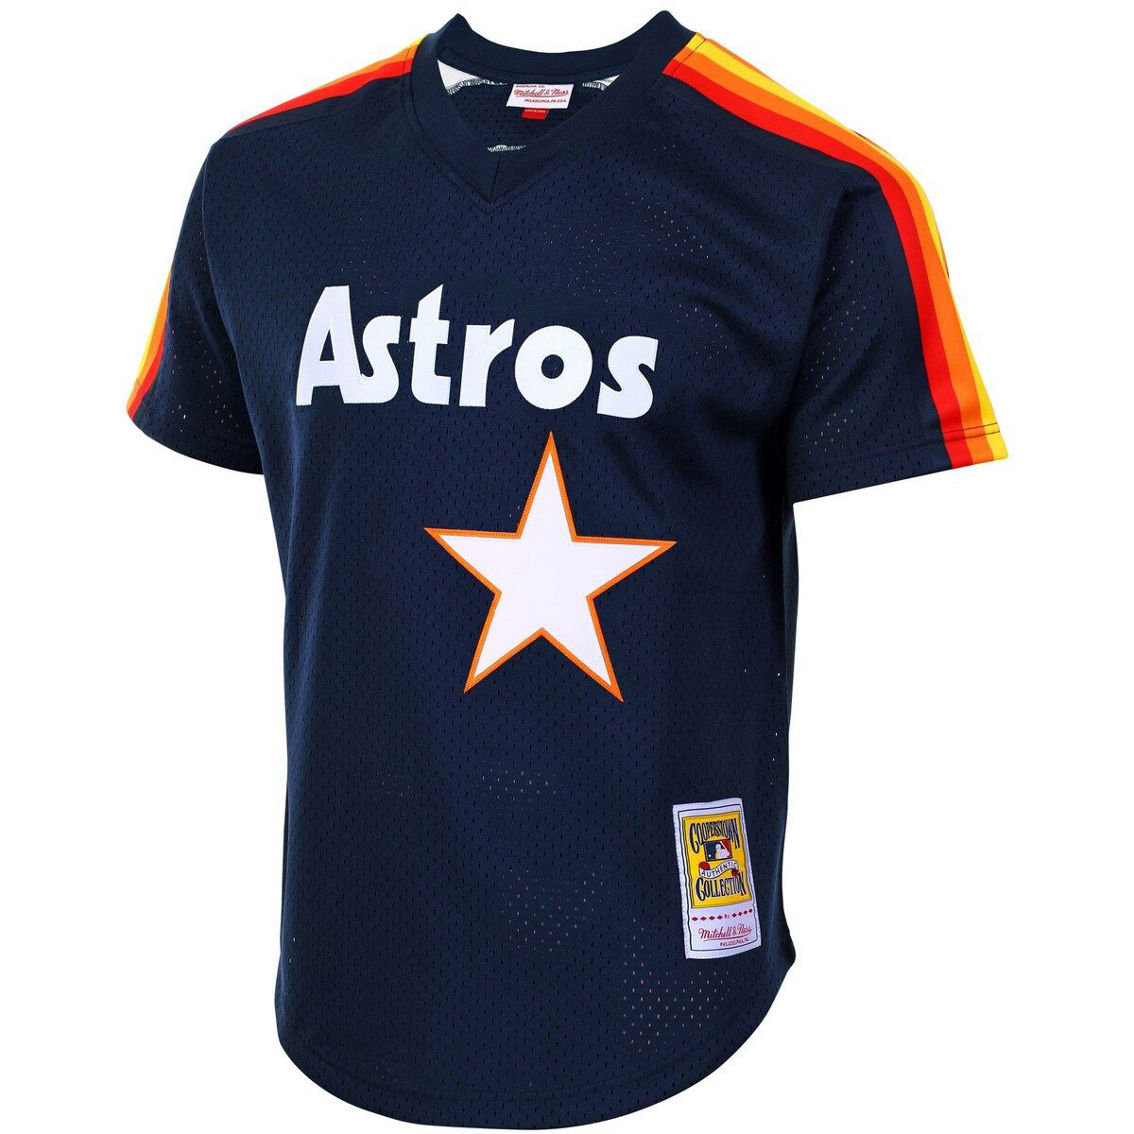 Mitchell & Ness Men's Jeff Bagwell Navy Houston Astros Cooperstown Mesh Batting Practice Jersey - Image 3 of 4